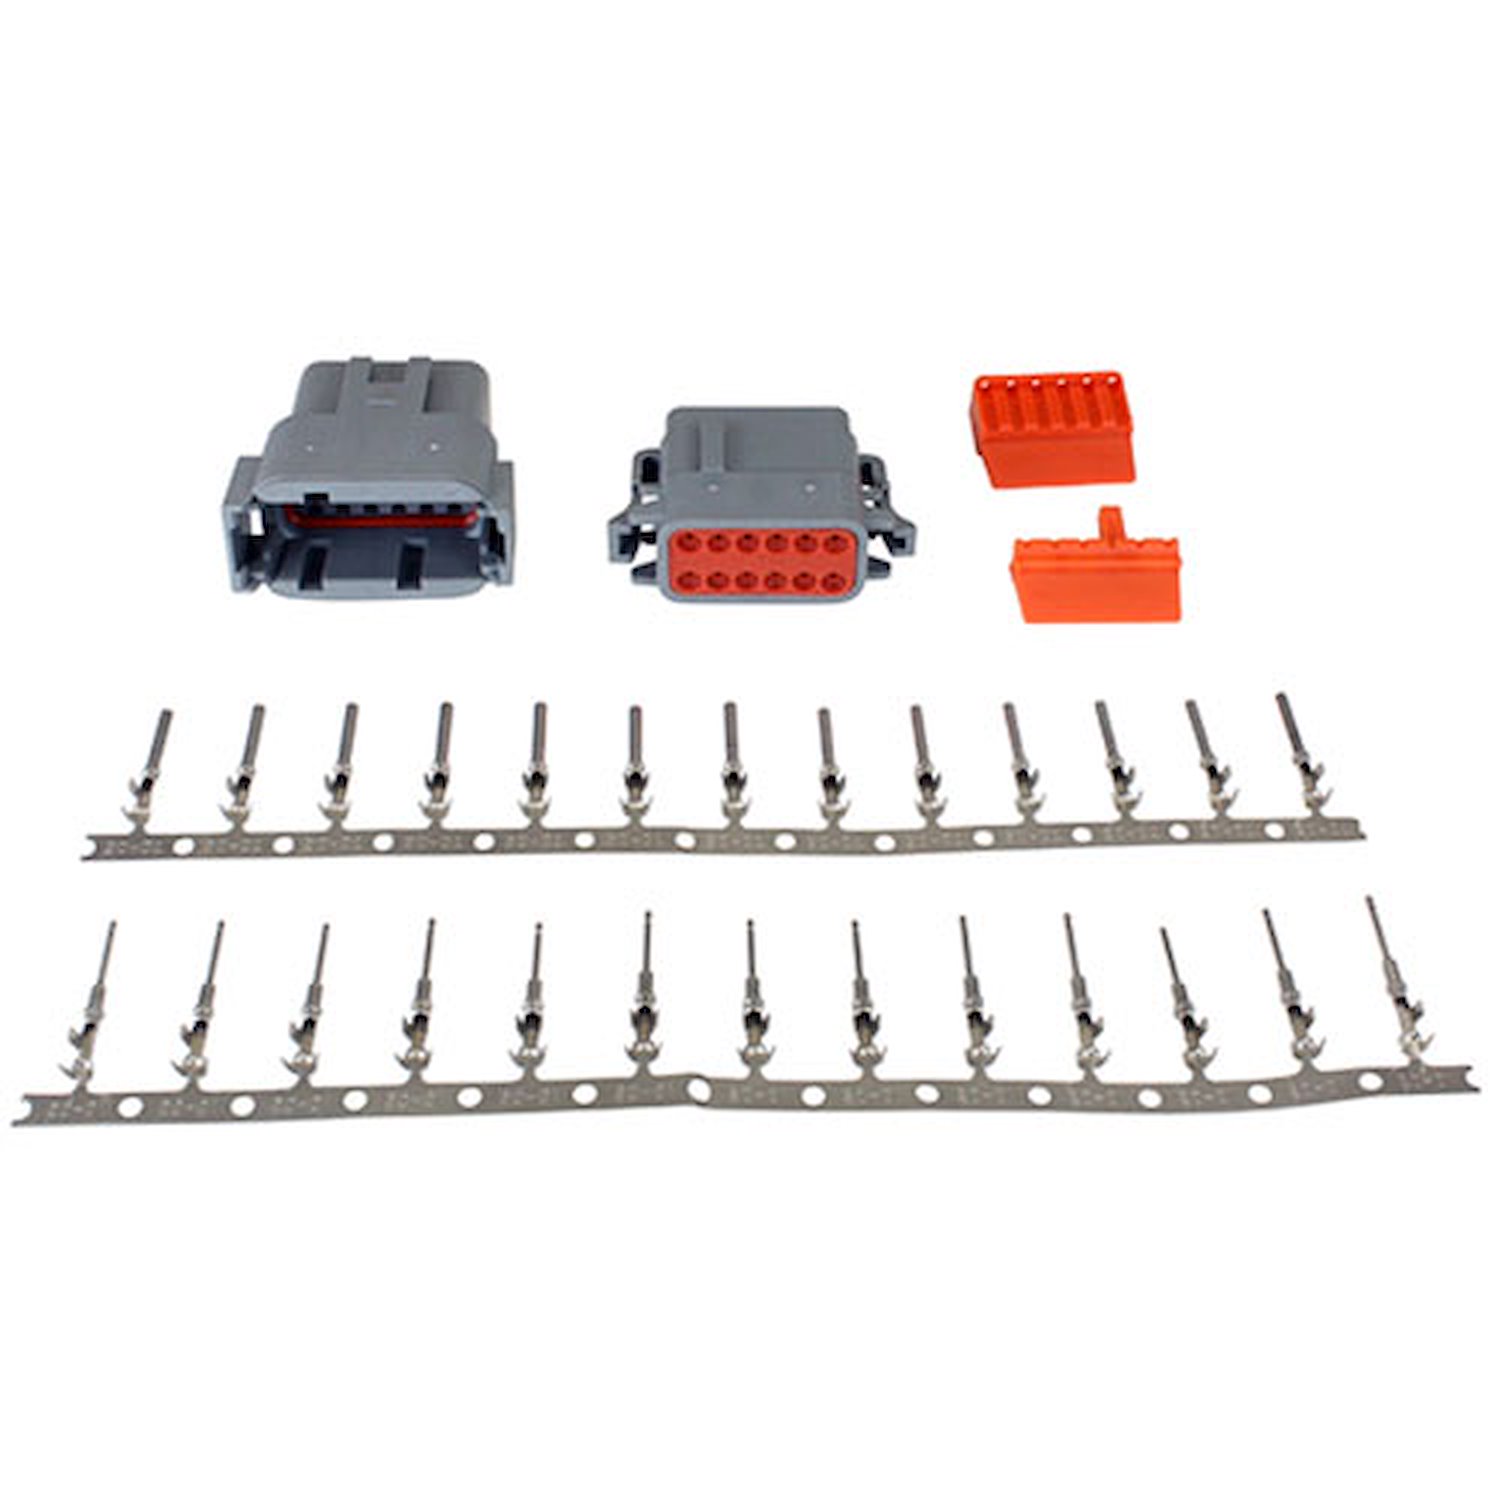 DTM-Style 12-Way Connector Kit. Includes Plug Receptacle Plug Wedge Lock Receptacle Wedge Lock 13 Fe